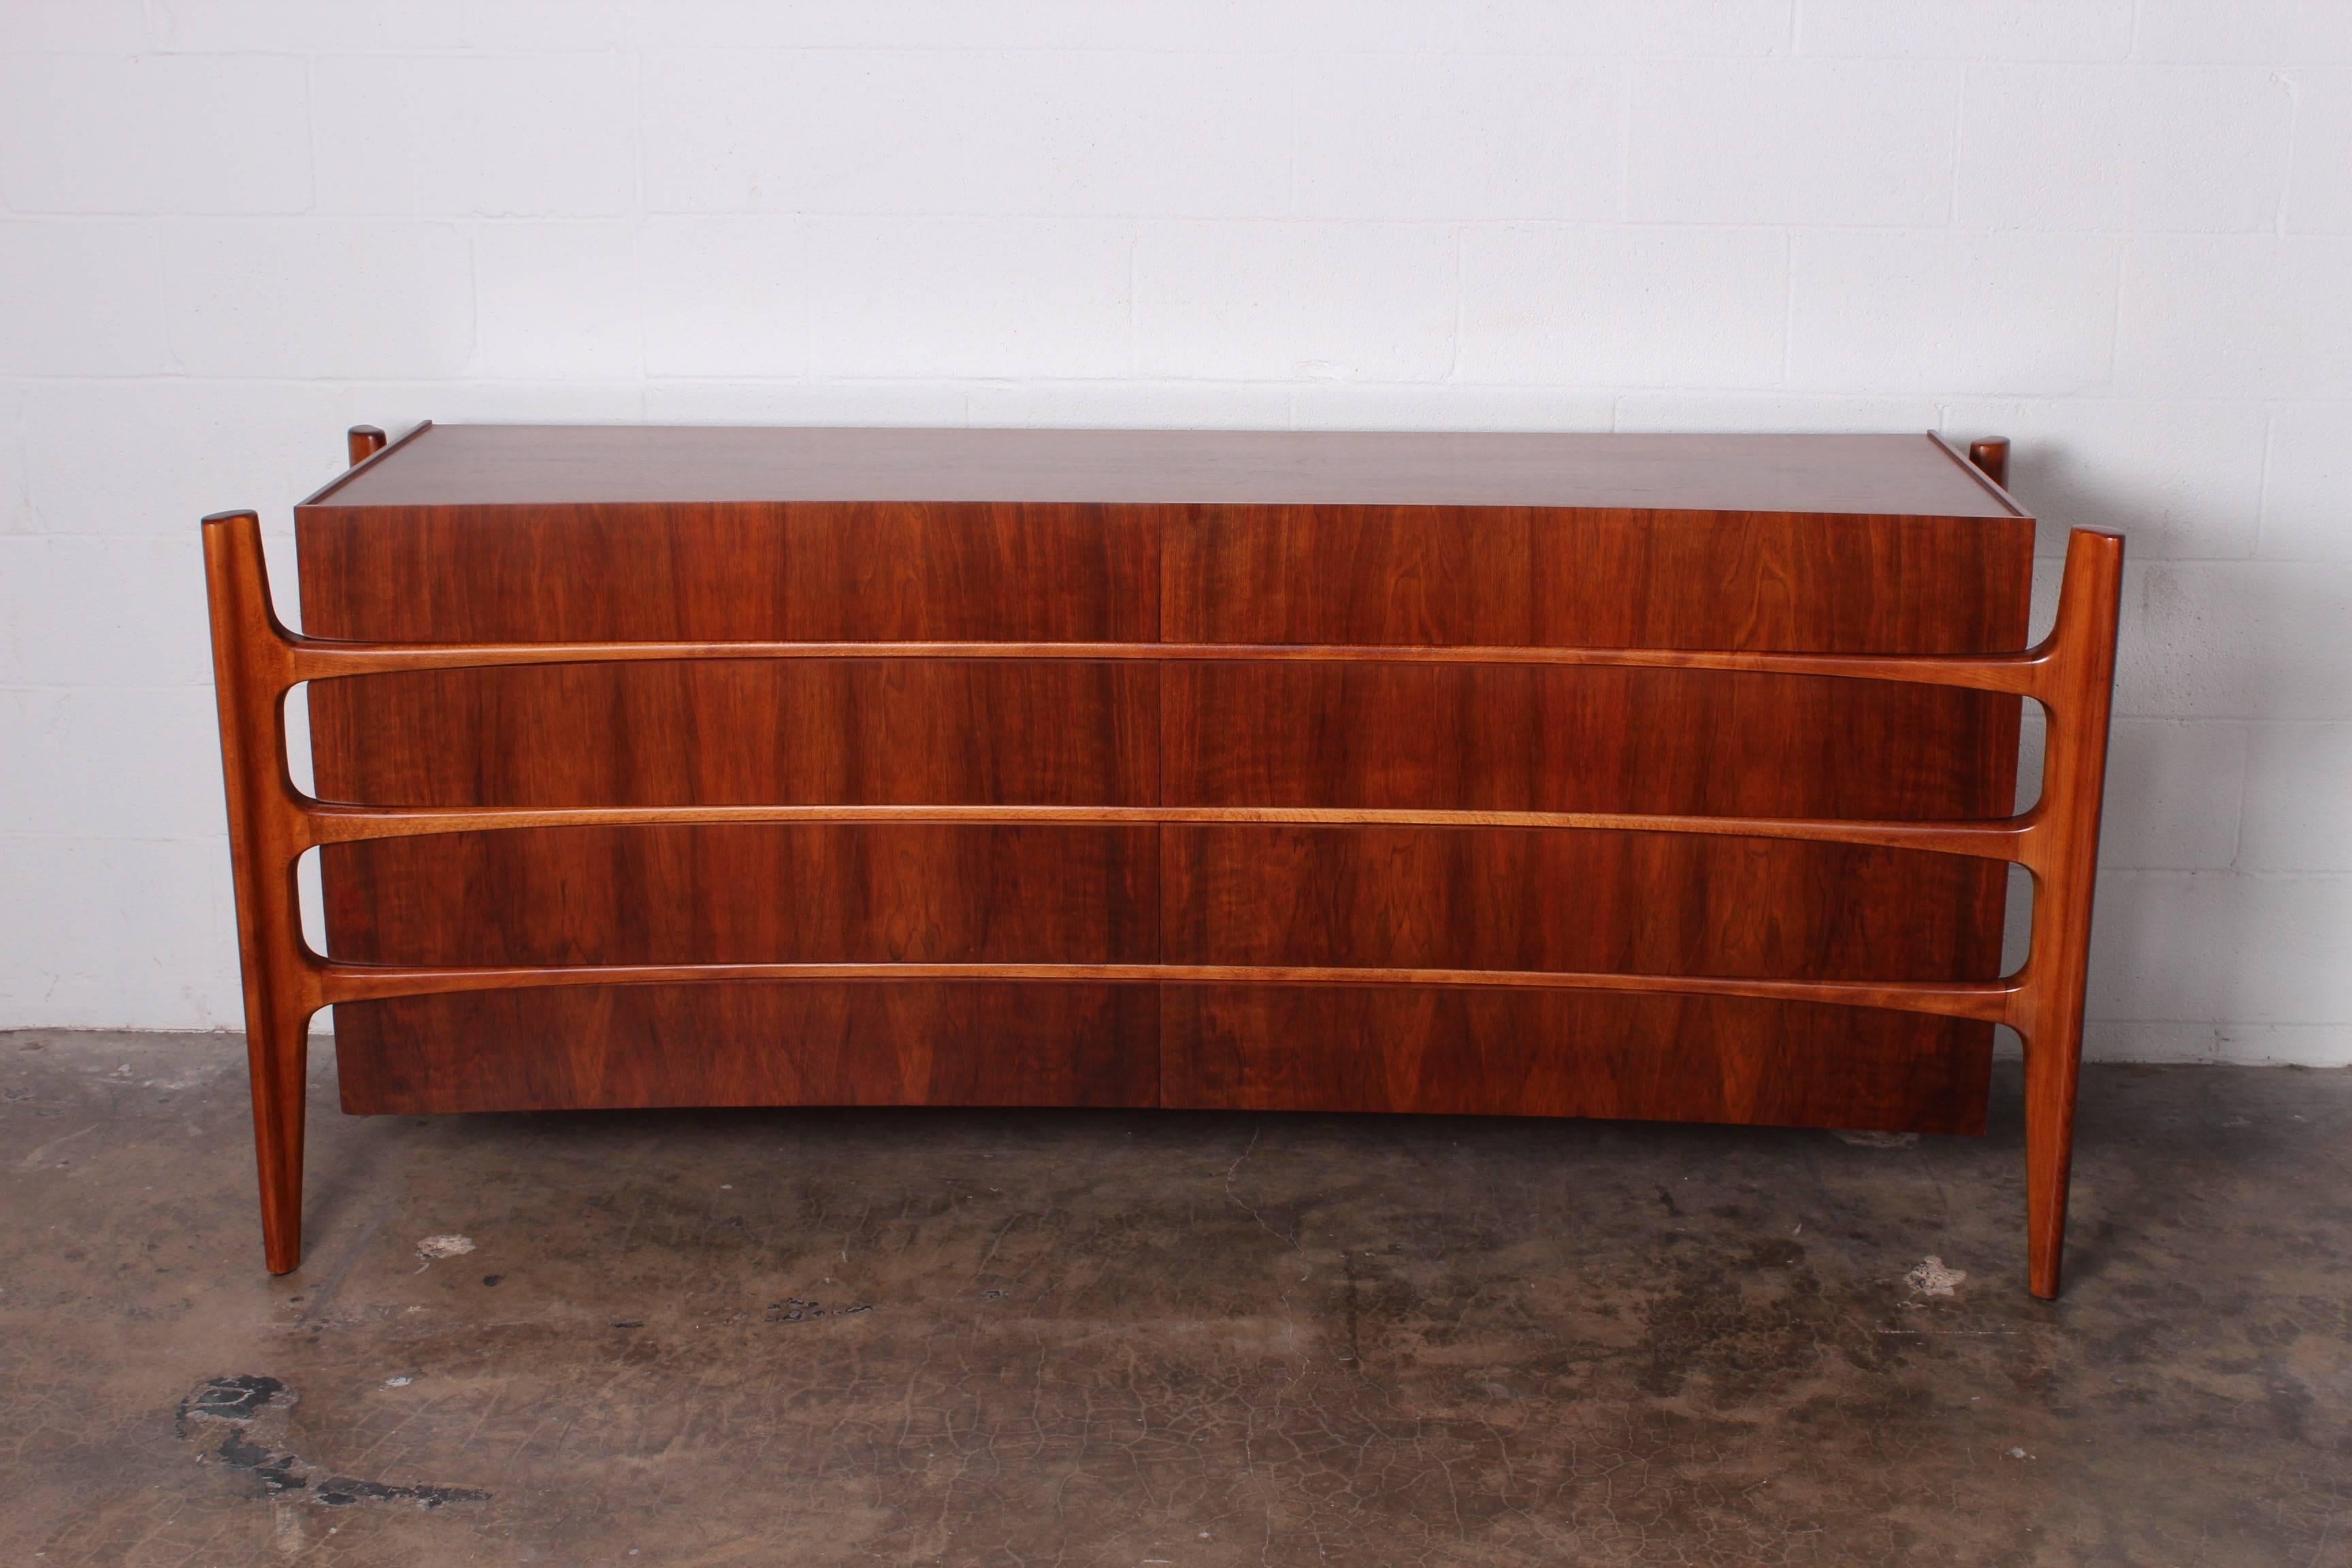 A sculptural walnut eight-drawer dresser designed by William Hinn and made in Sweden by Swedish furniture guild for Urban Furniture.